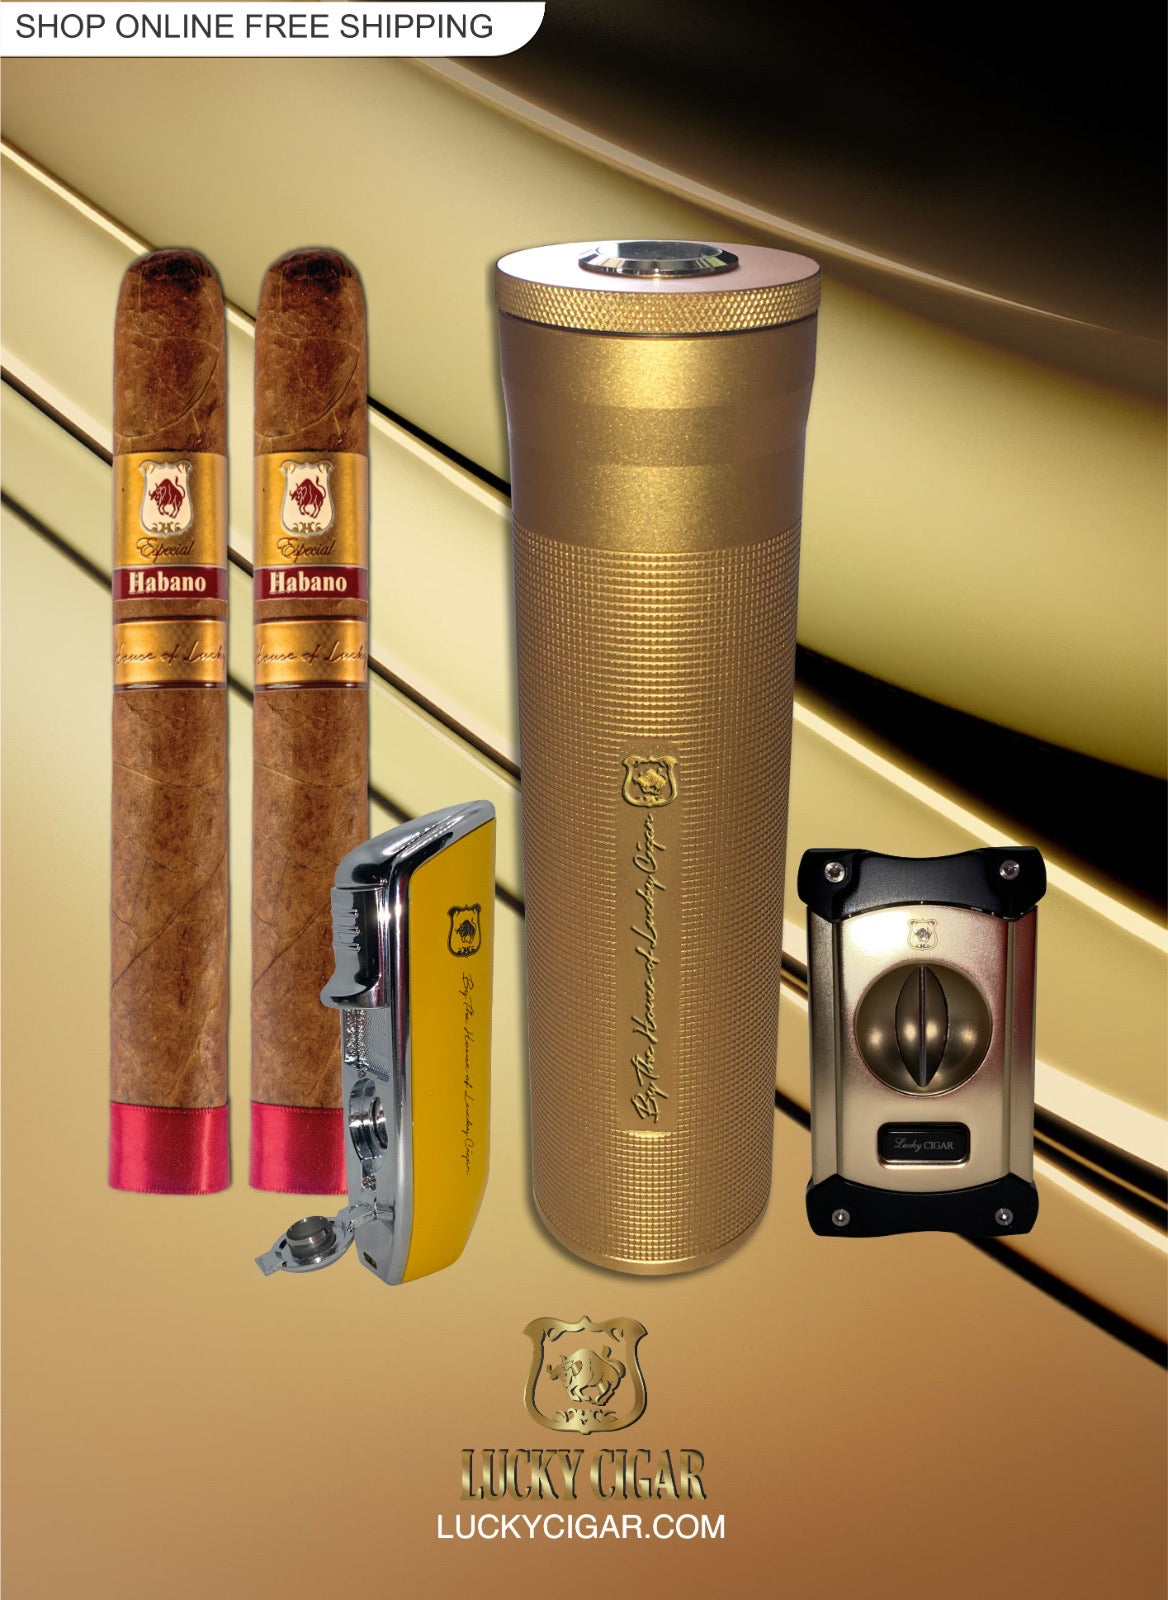 Habano Cigars: Habano Esteli by Lucky Cigar: Set of 2 Cigars Toro with Humidor, Torch, Cutter